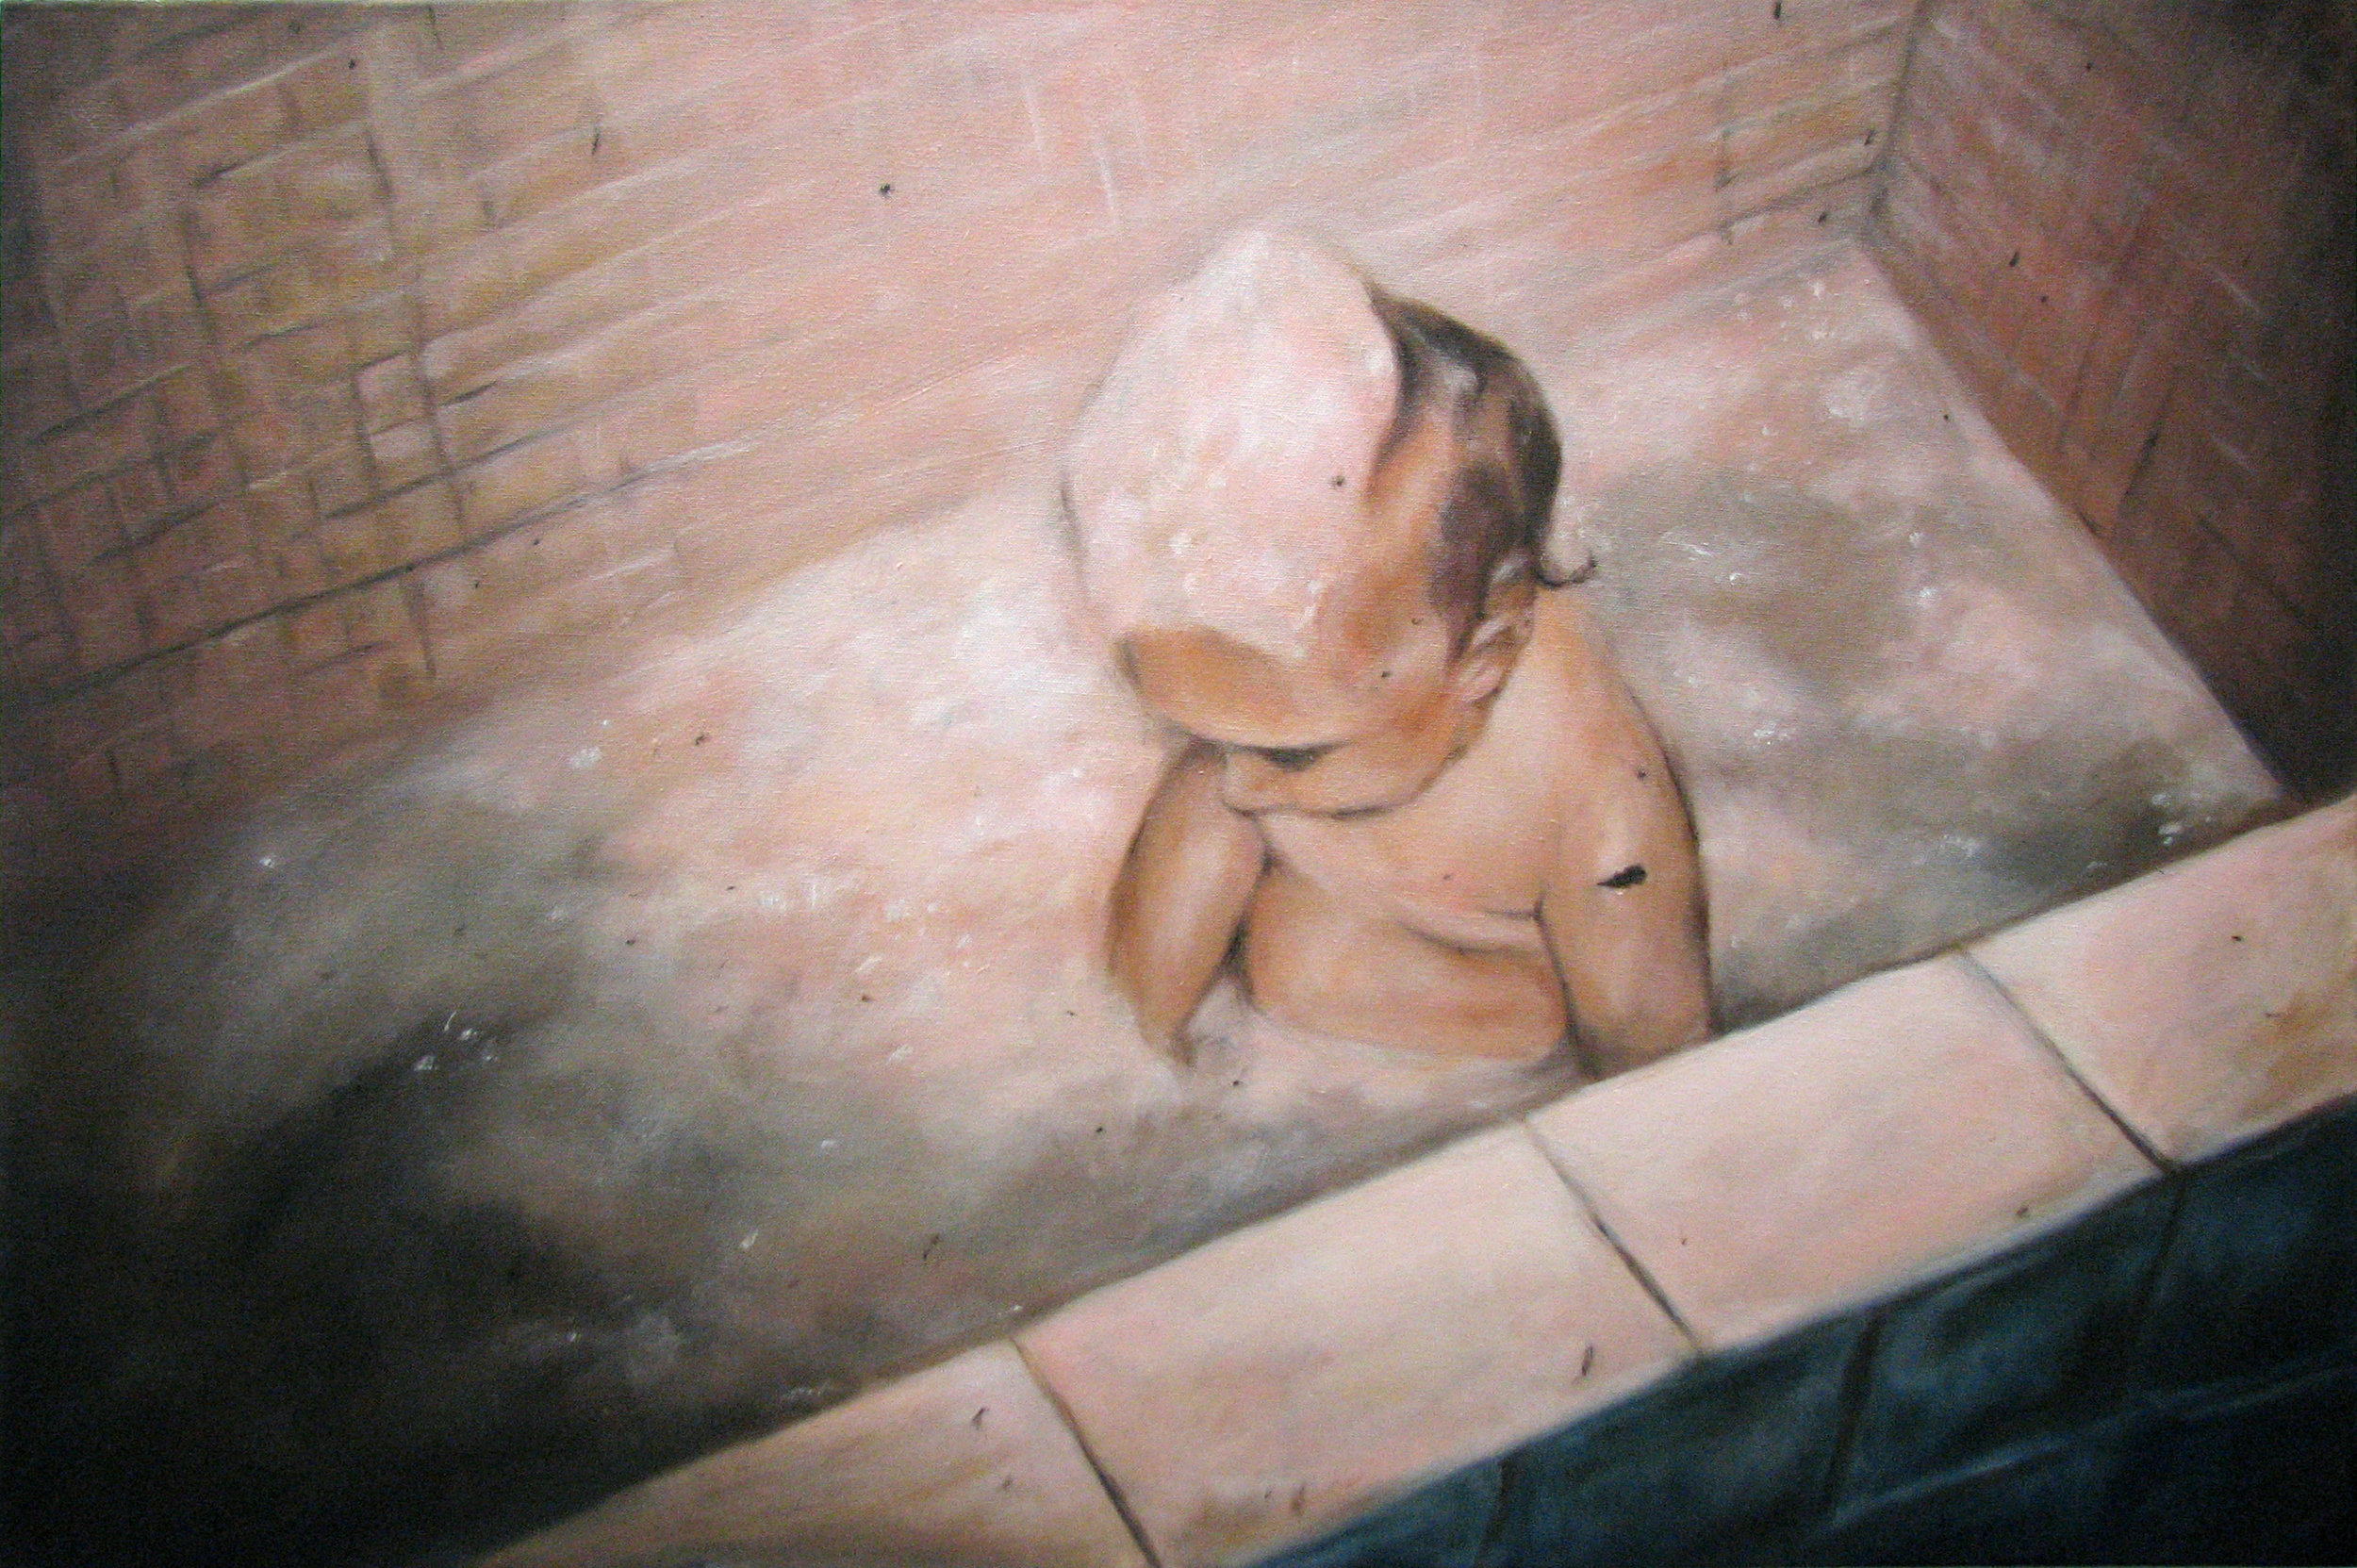  “August ’71 (Child)”  oil on canvas  24” x 36”  2009 